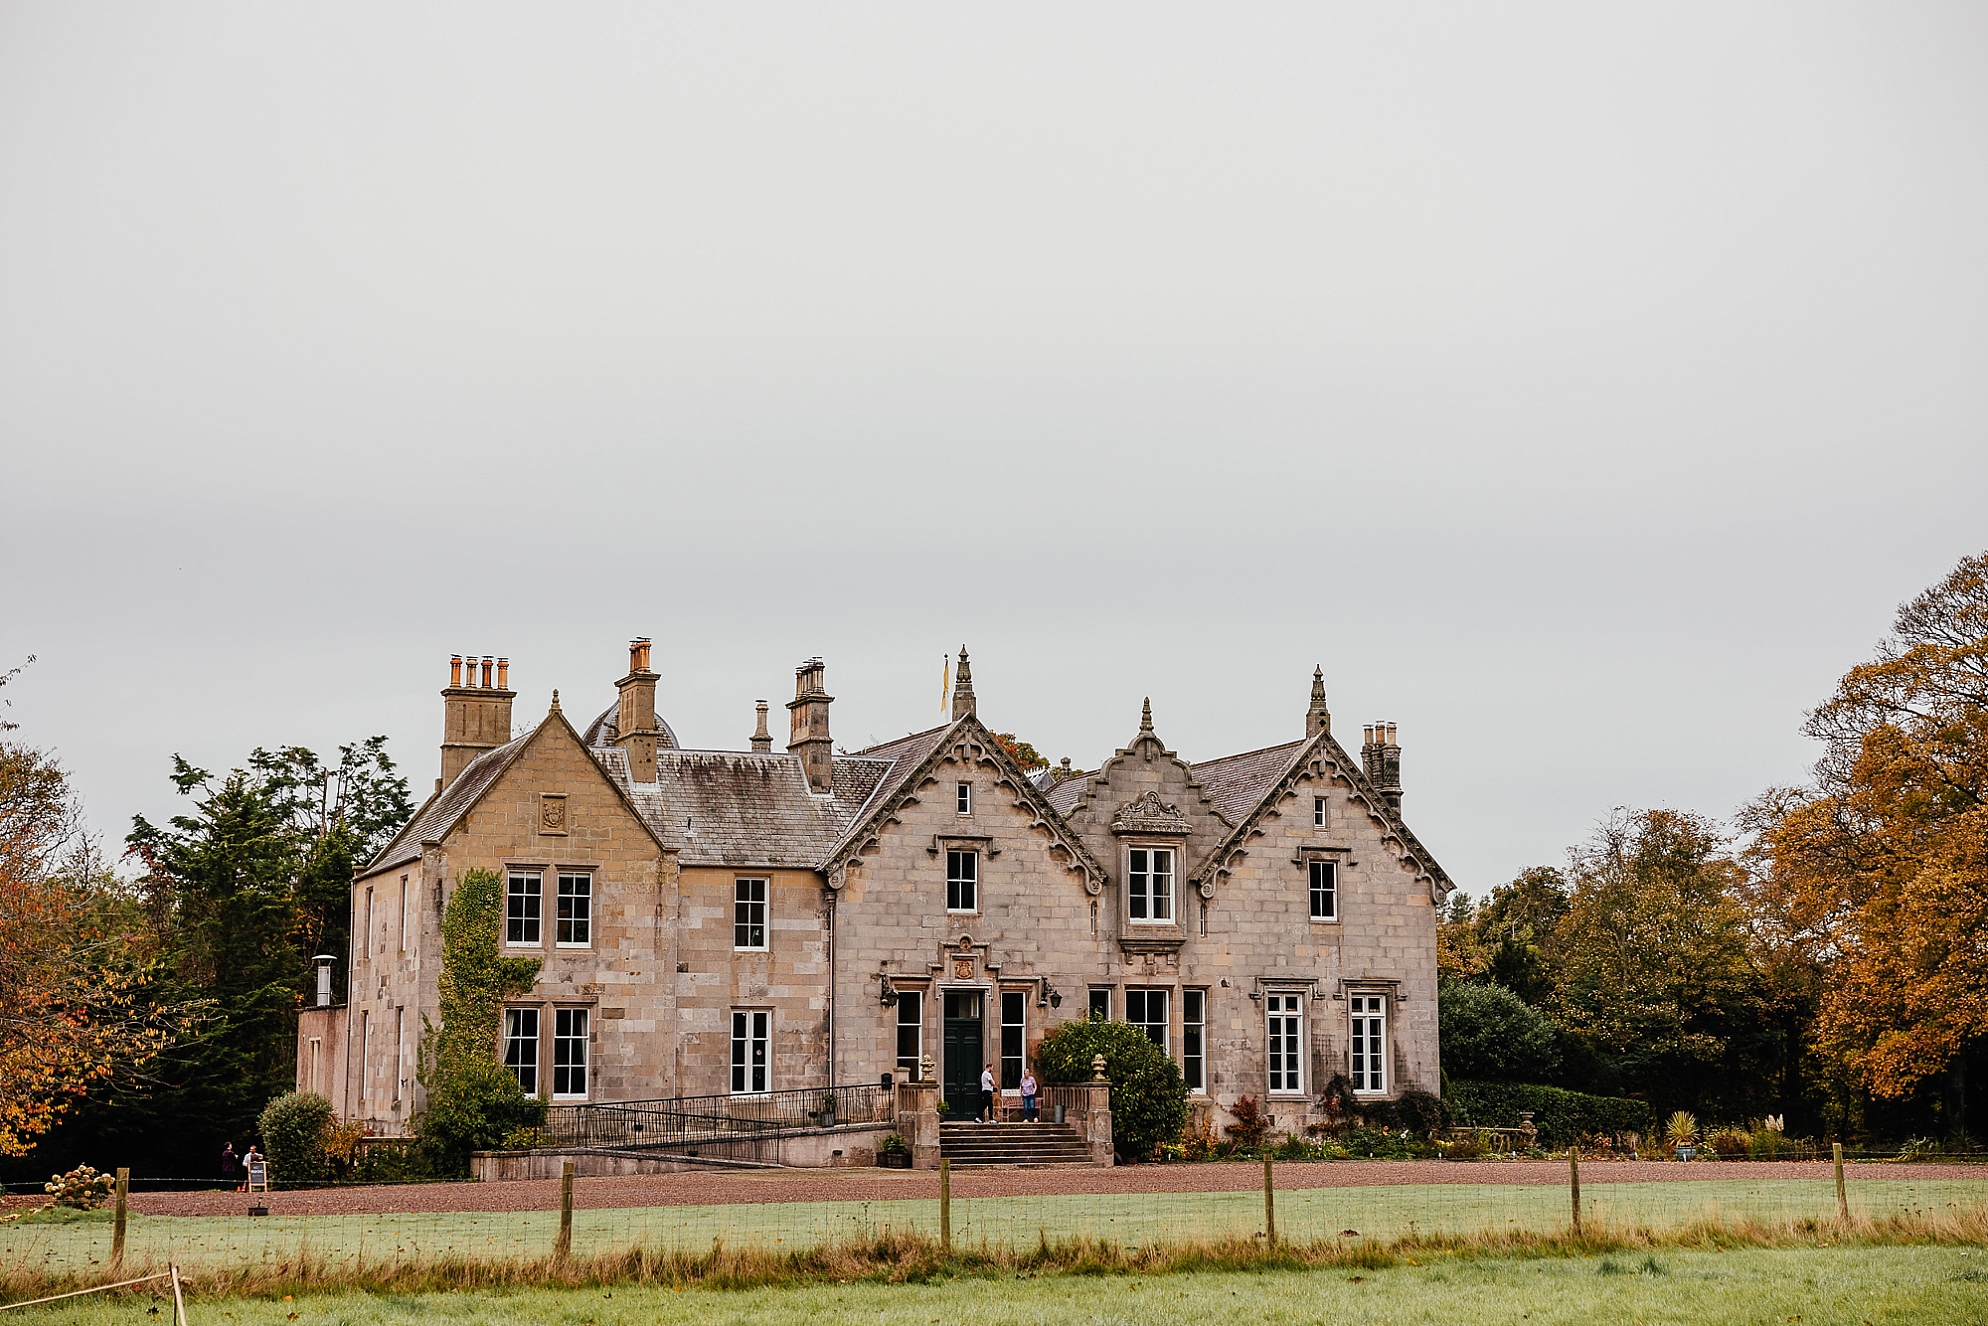 outside exterior view of Netherbyres House wedding in Eyemouth Scotland on an Autumn day a rustic and characterful large Victorian stately home surrounded by mature trees and lawn in a red gravel courtyard